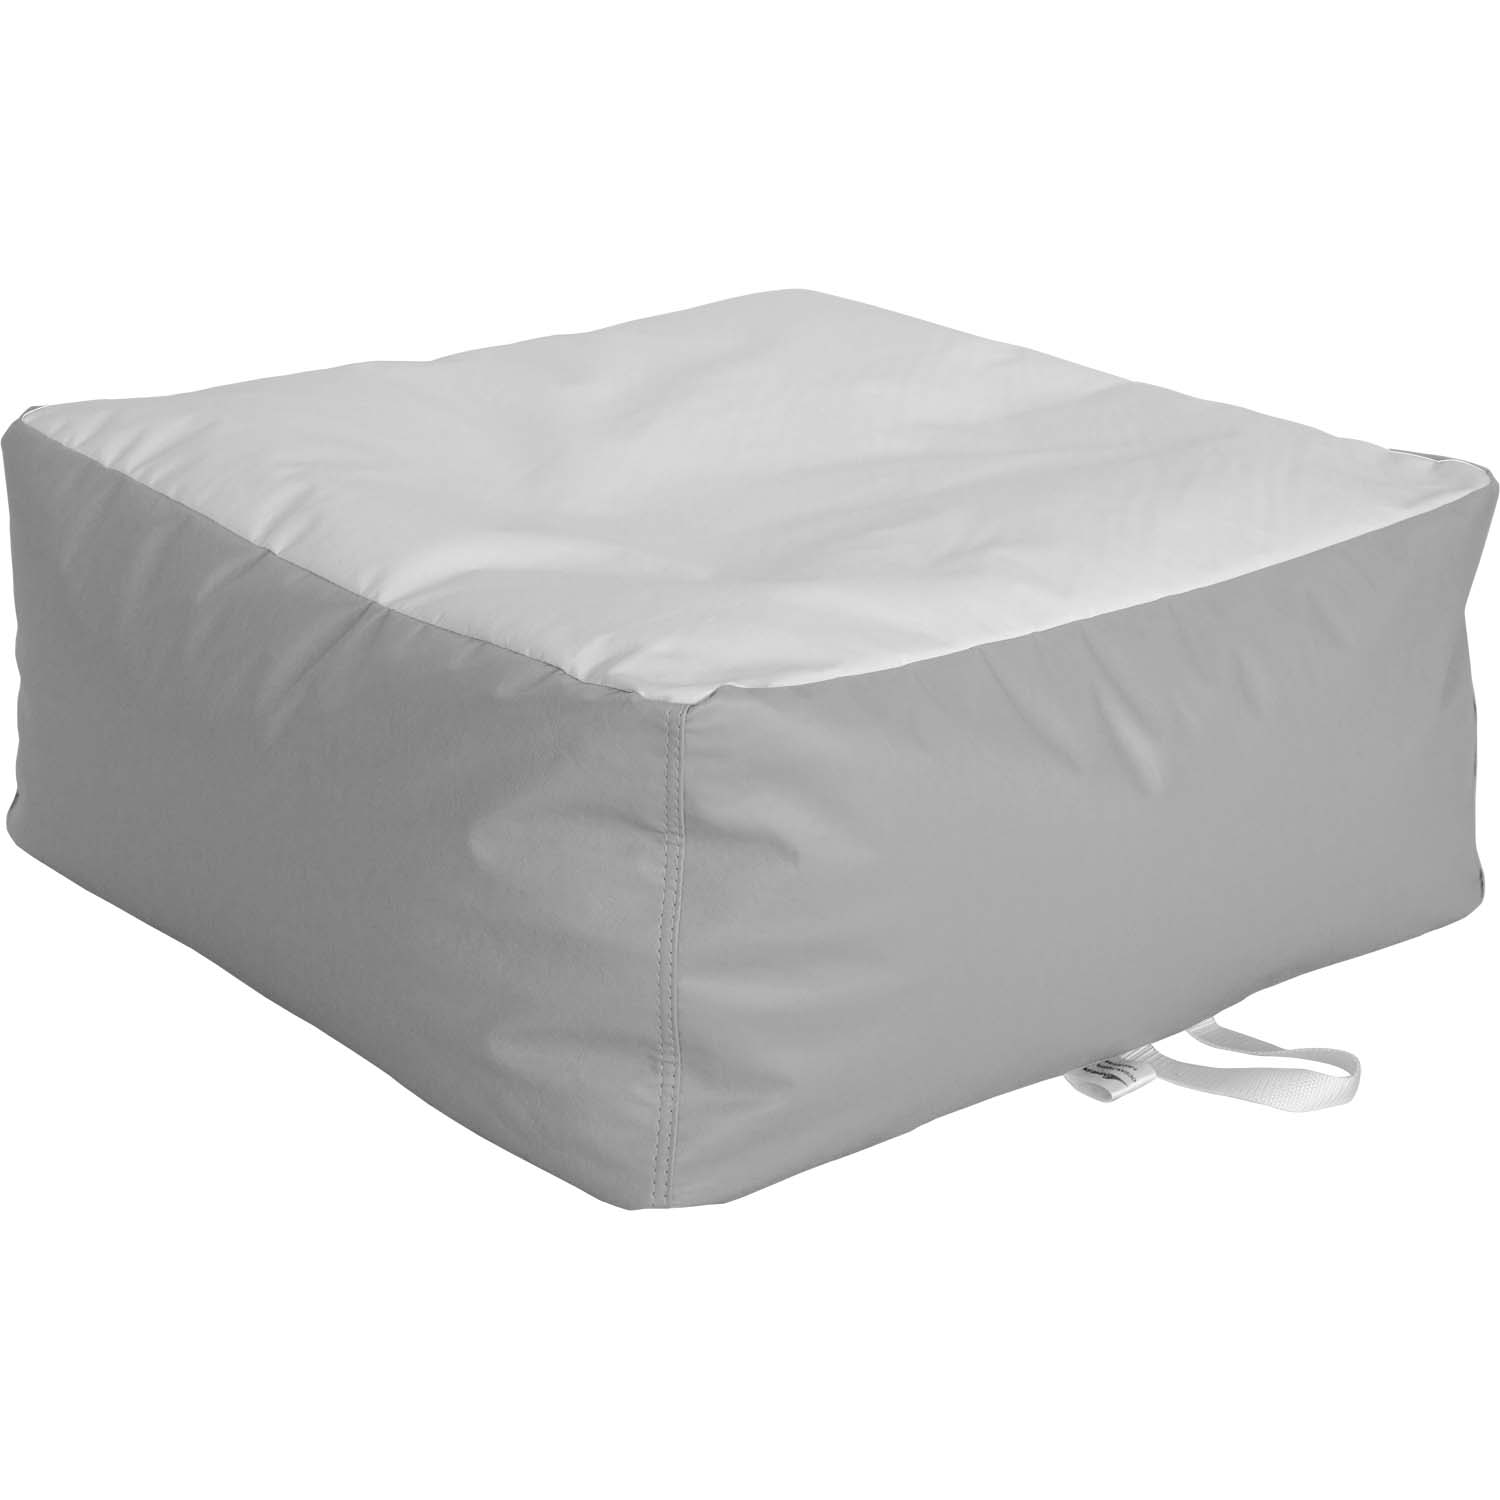 A grey Ocean-Tamer Ottoman on a white background.